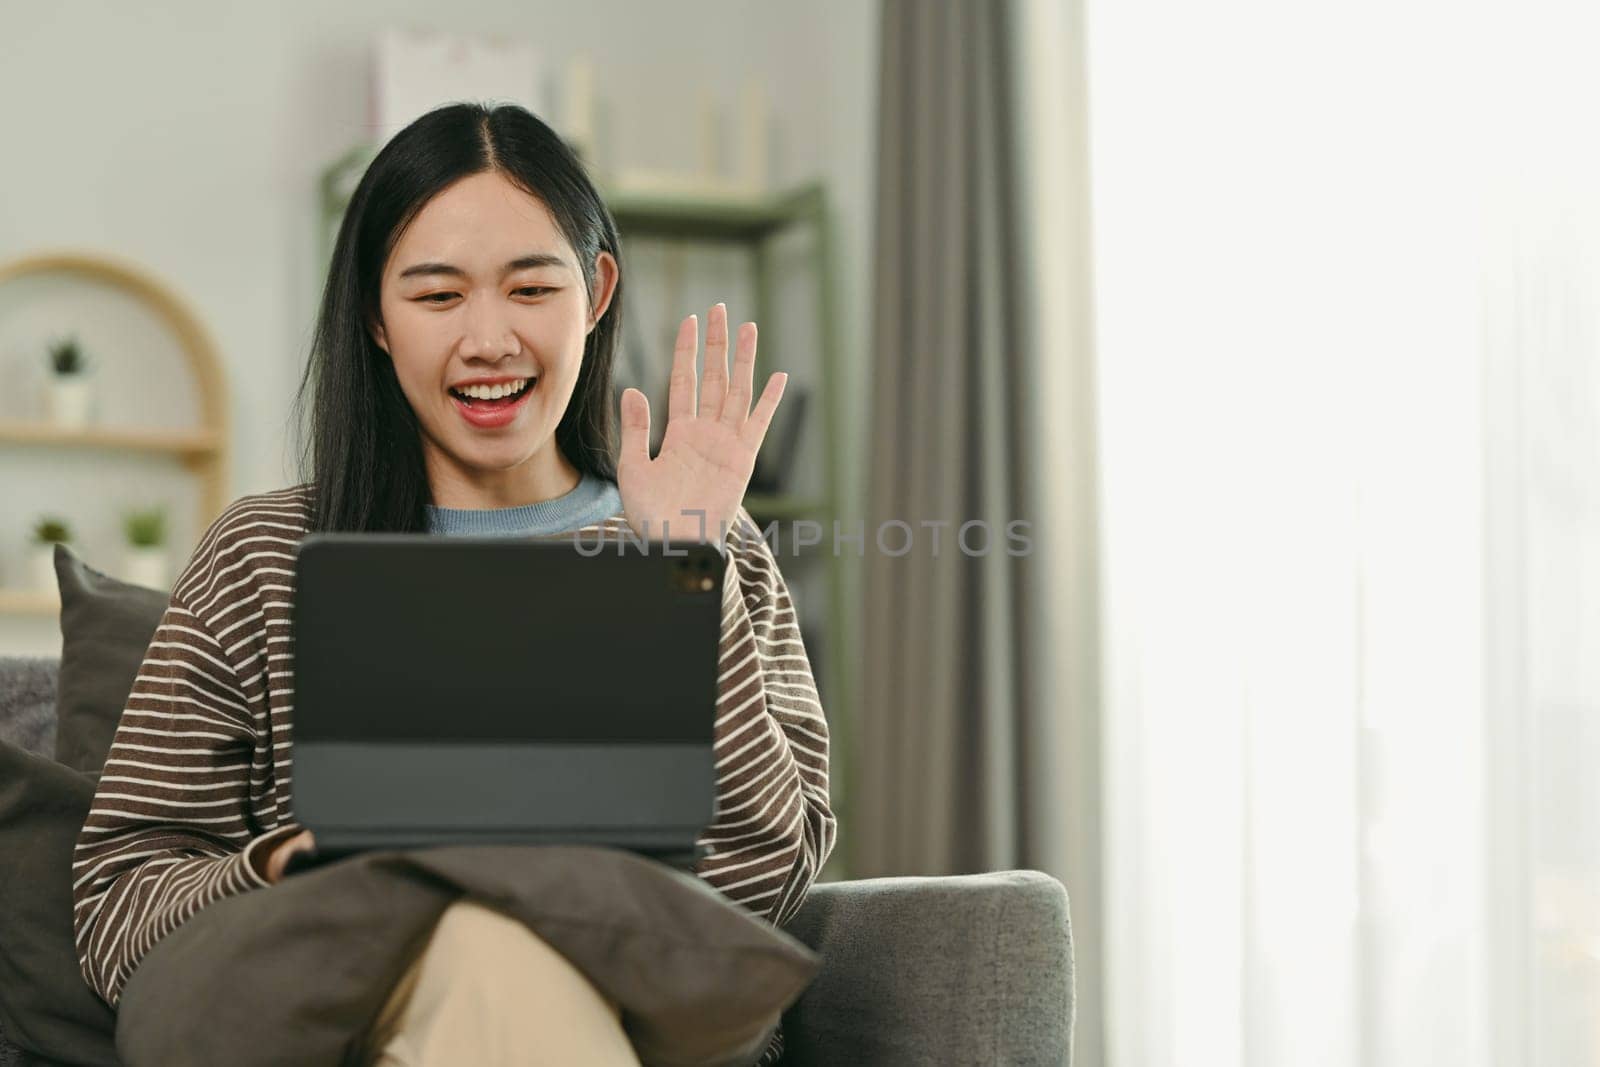 Cheerful young Asian woman smiling and waving hand at digital tablet while chatting on video call.